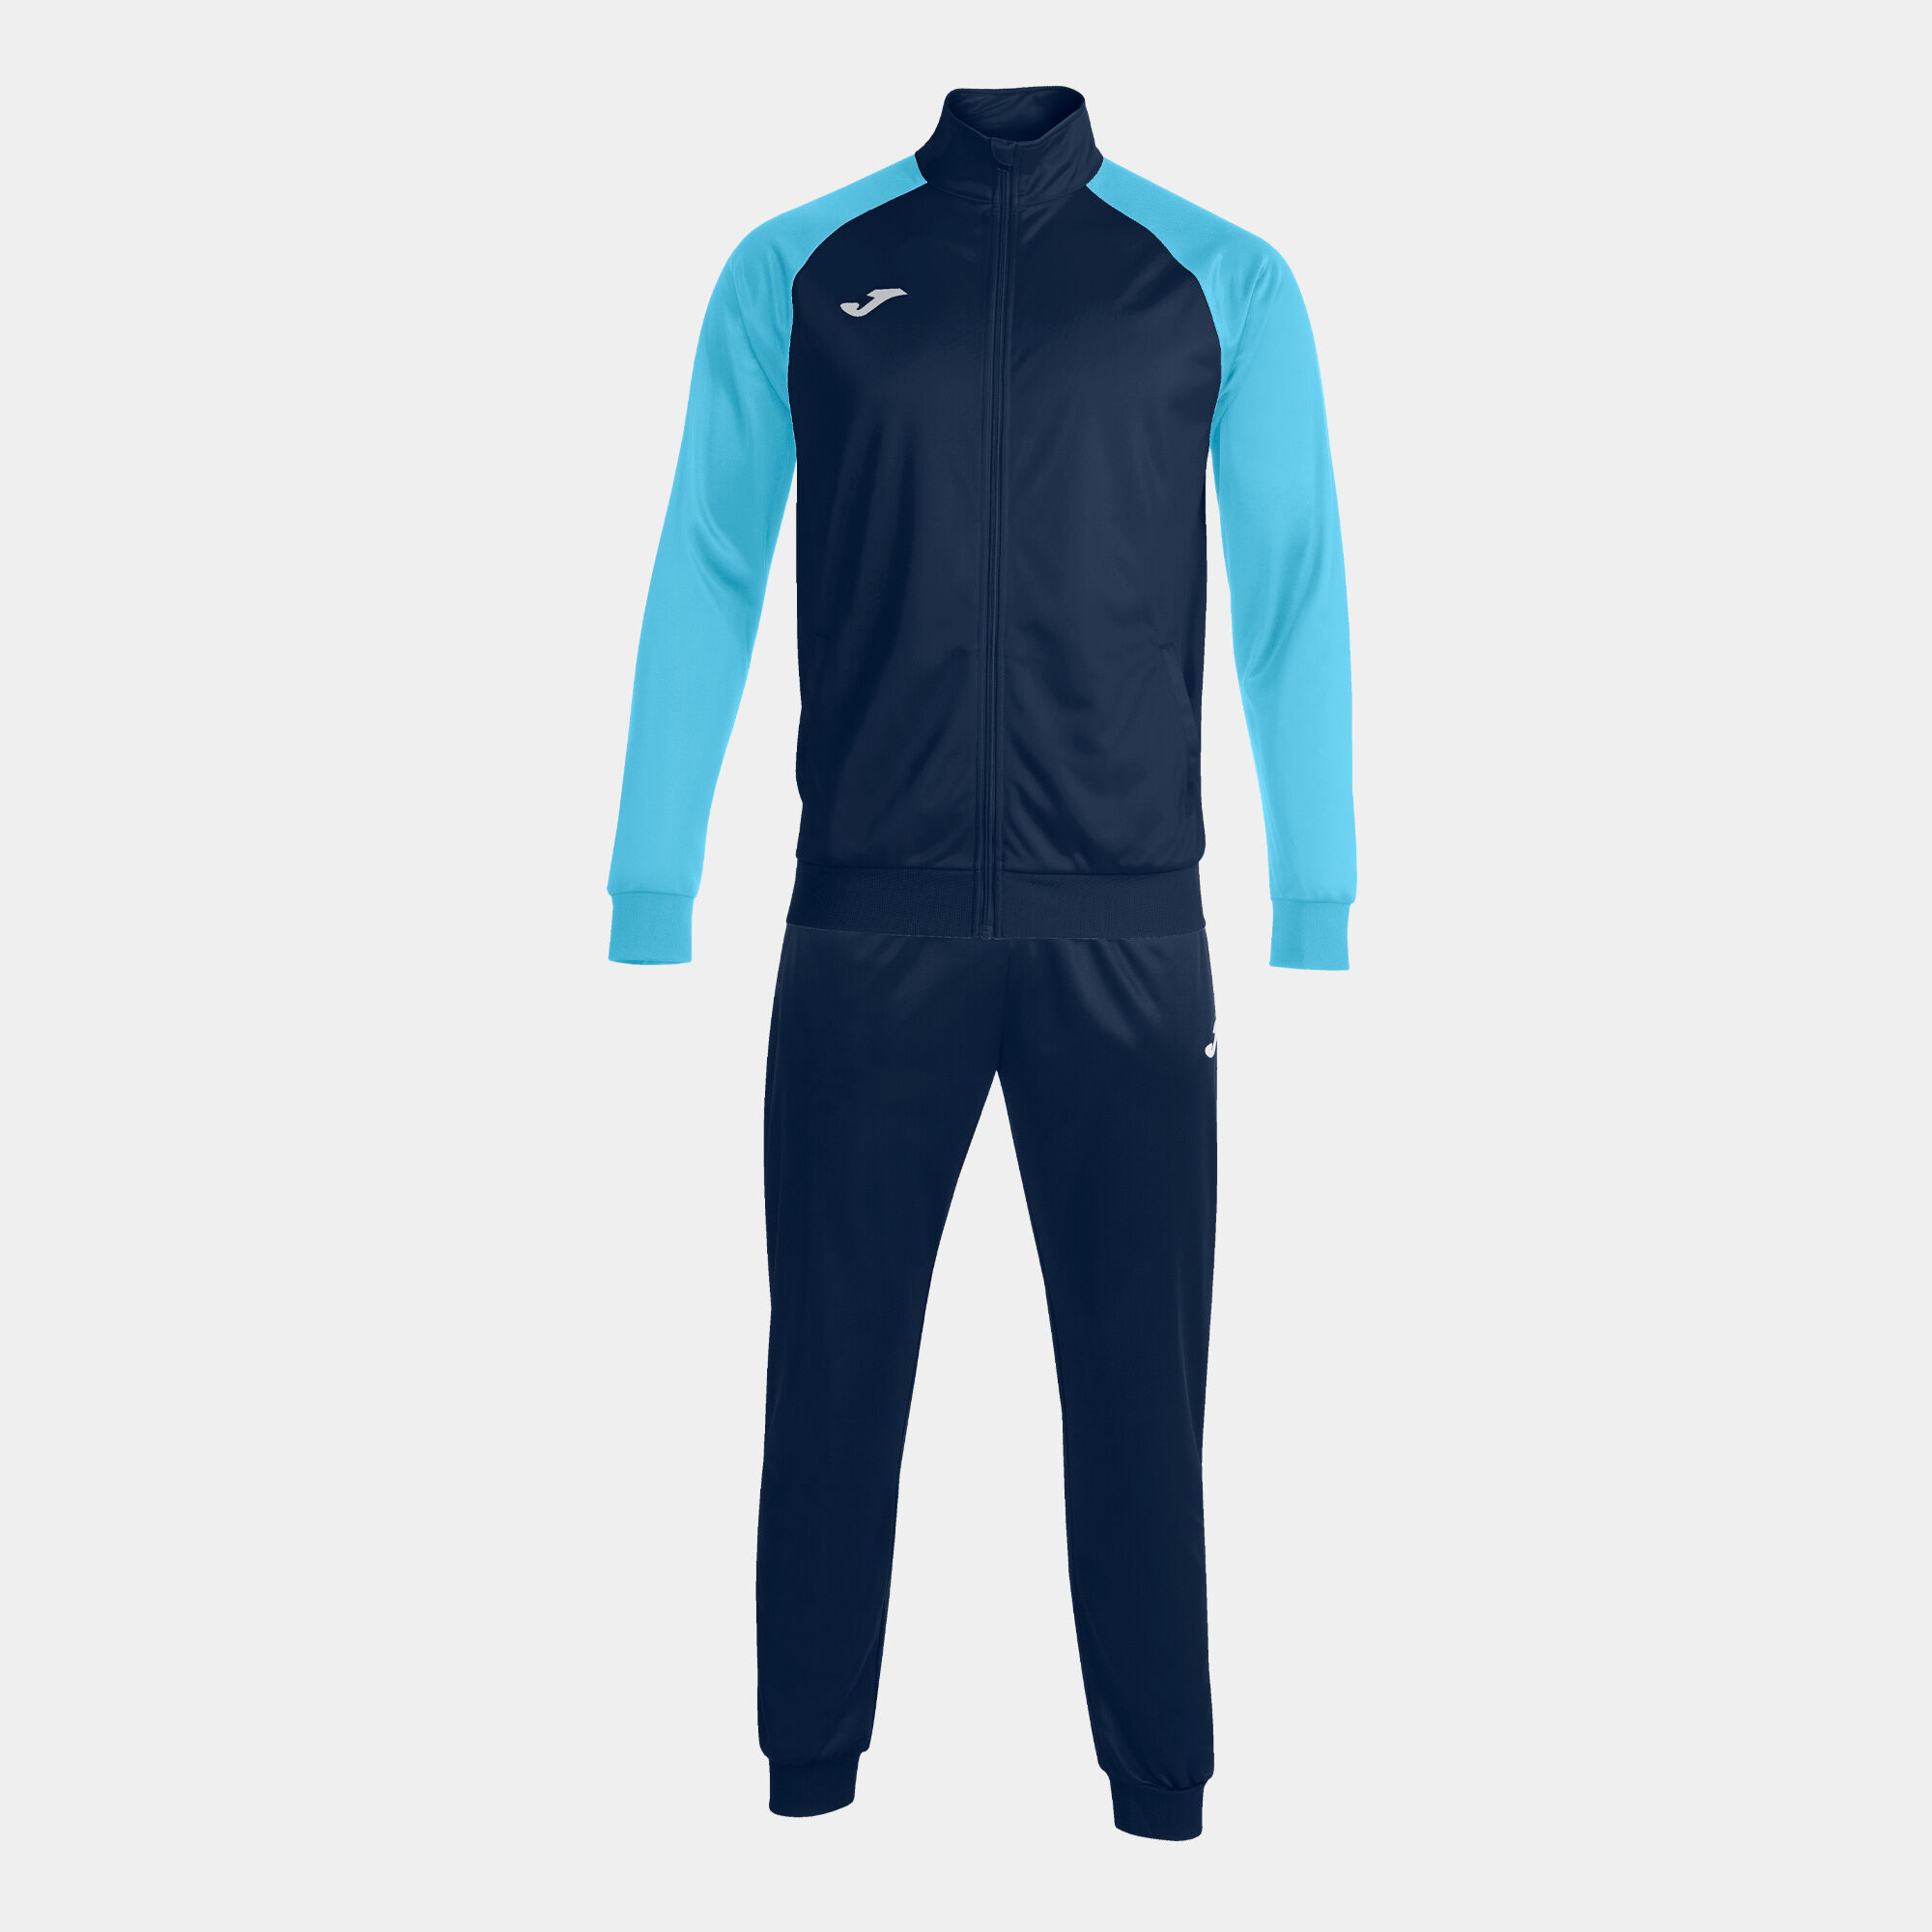 Tracksuit man Academy IV navy blue fluorescent turquoise